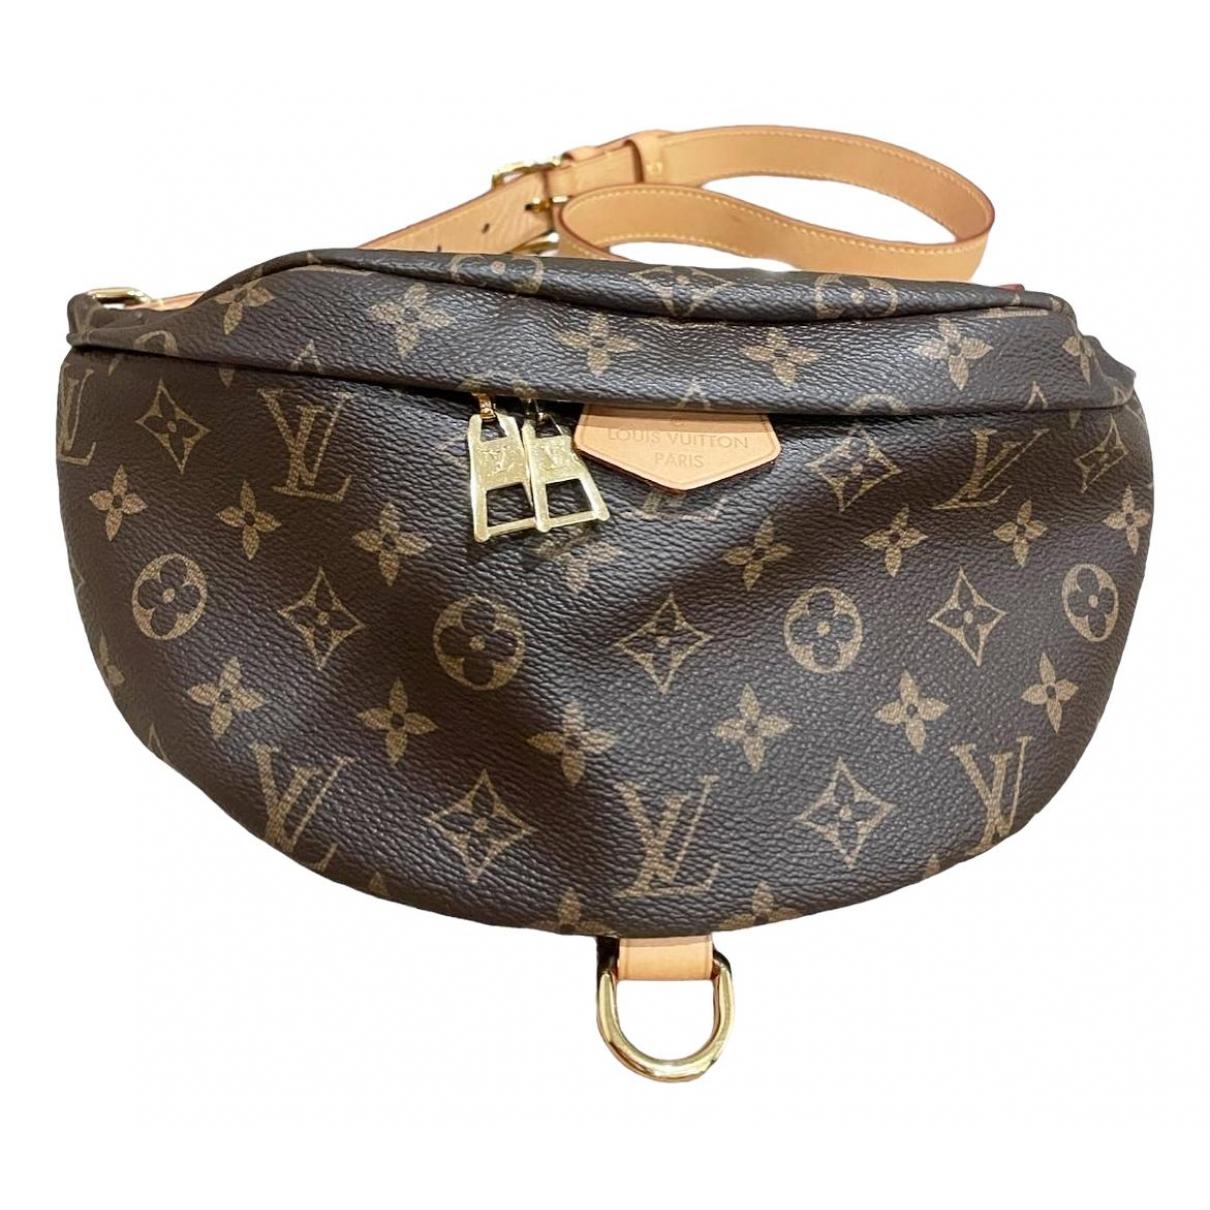 Petite malle leather crossbody bag Louis Vuitton Brown in Leather - 22246746